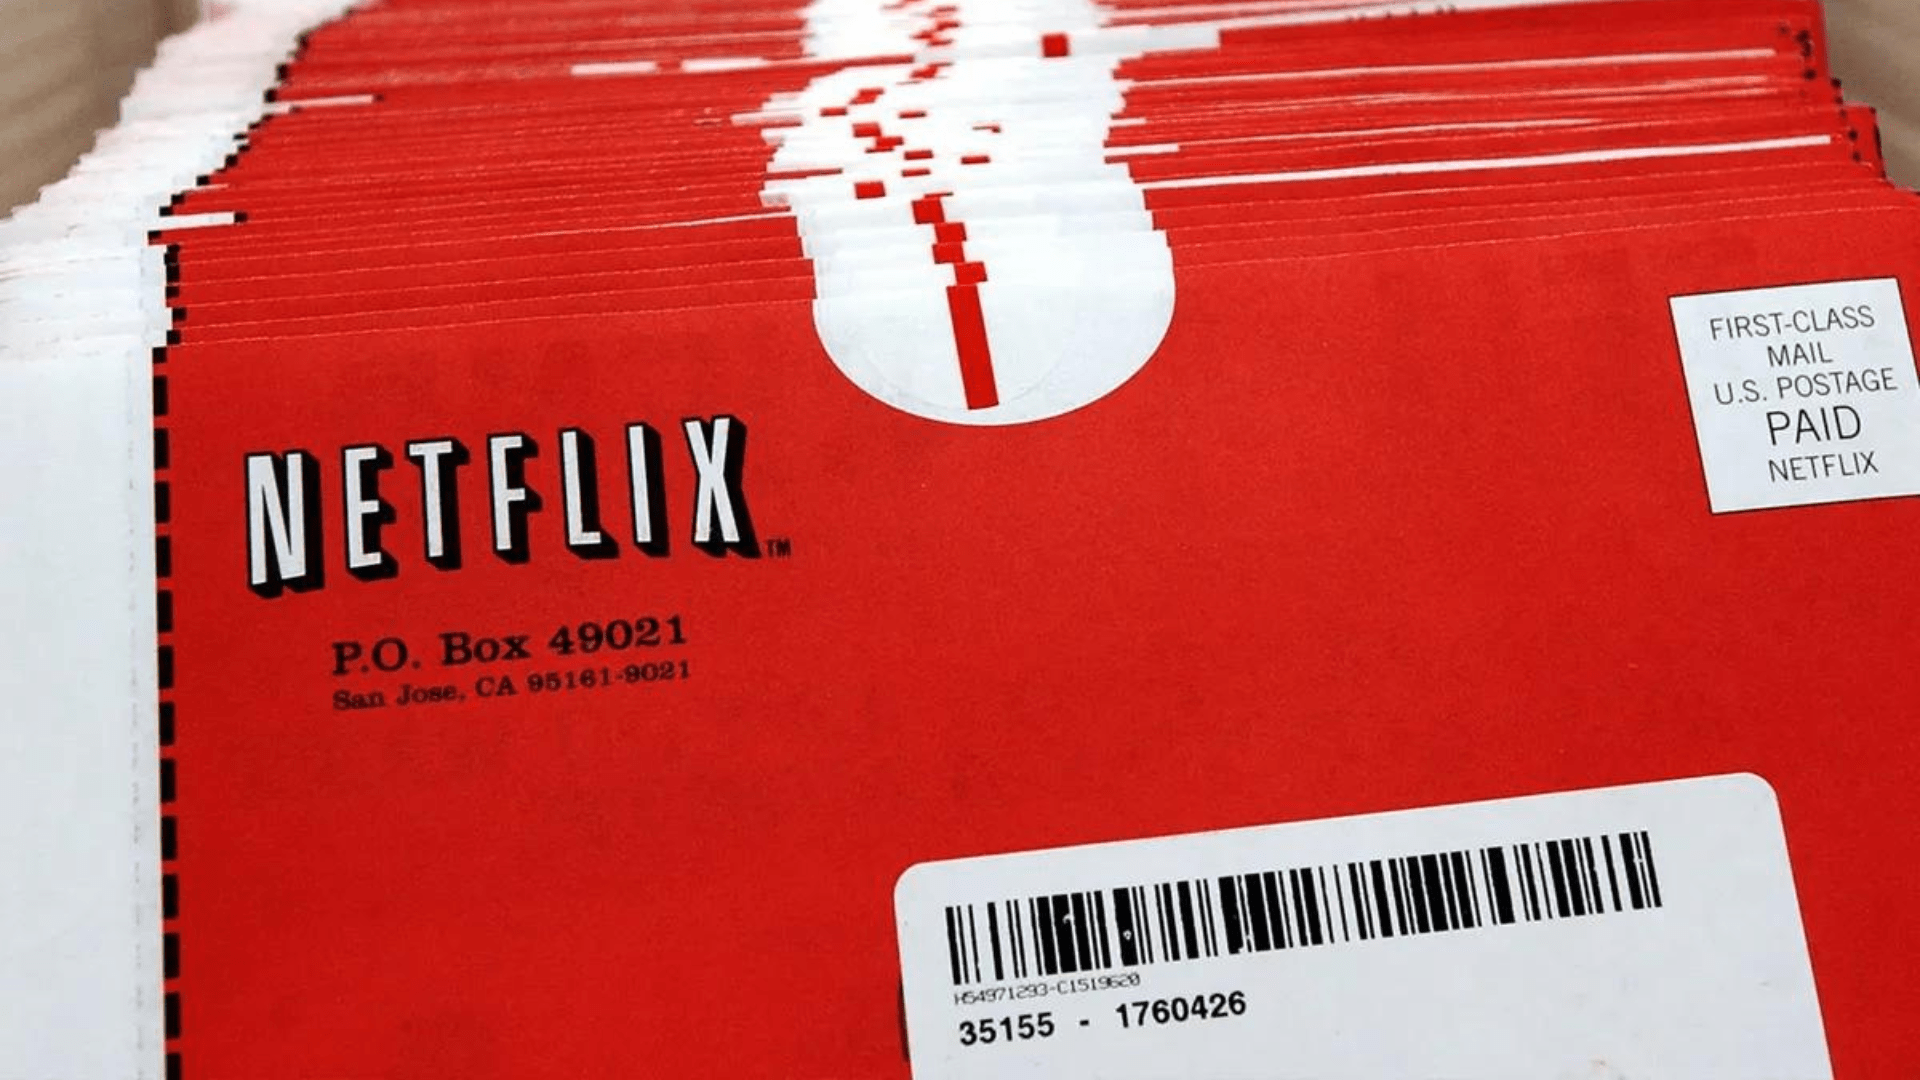 Netflix Red Envelopes - When Netflix Came In The Mail: Goodbye To 25 Years Of Red Envelopes